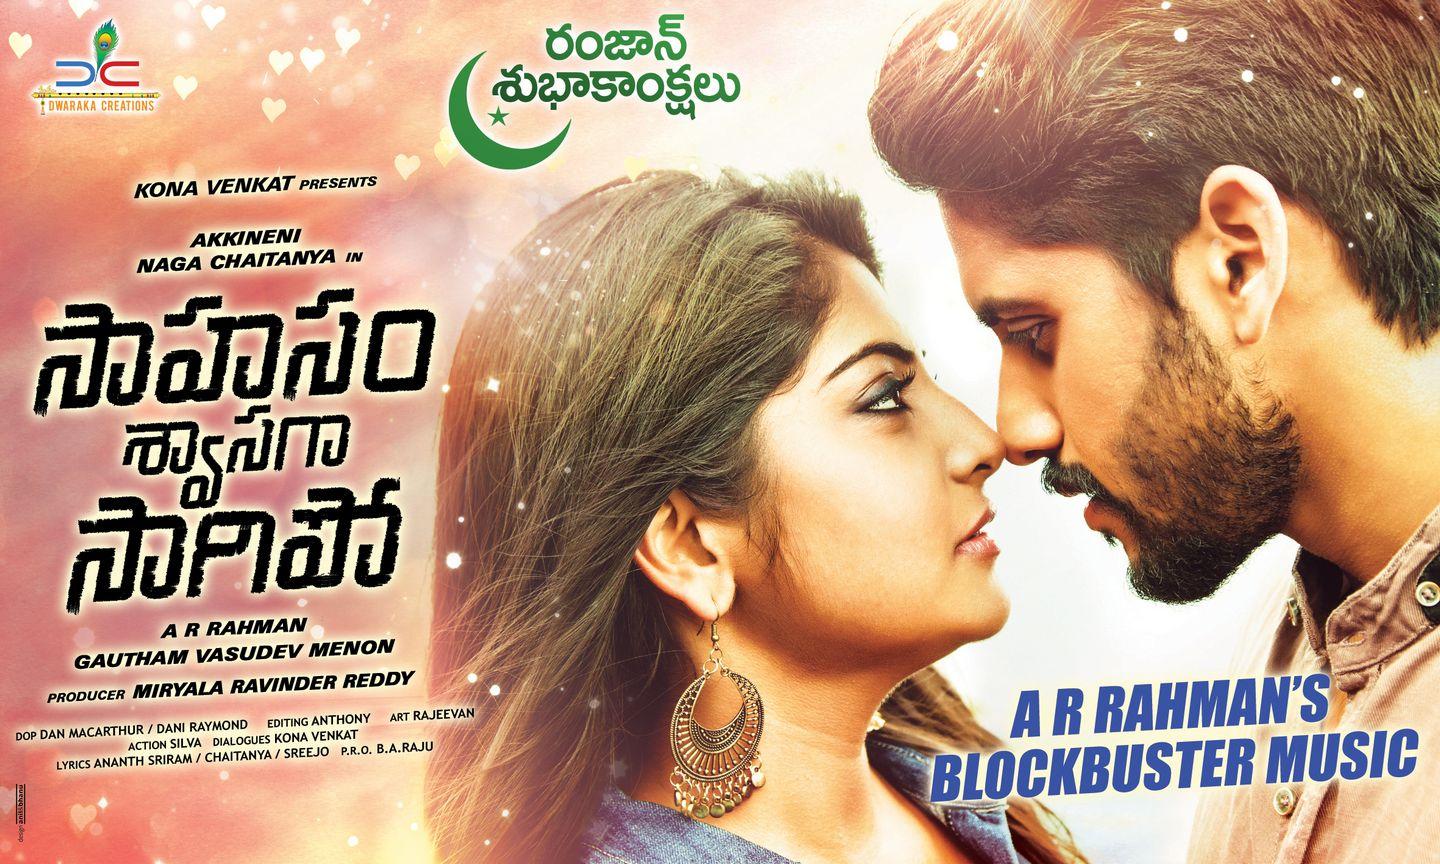 Akkineni Naga Chaitanya - Thank you thank you so much for this..to all of  you out there who enjoyed the film and spread the love..to those who didn't  promise to try harder